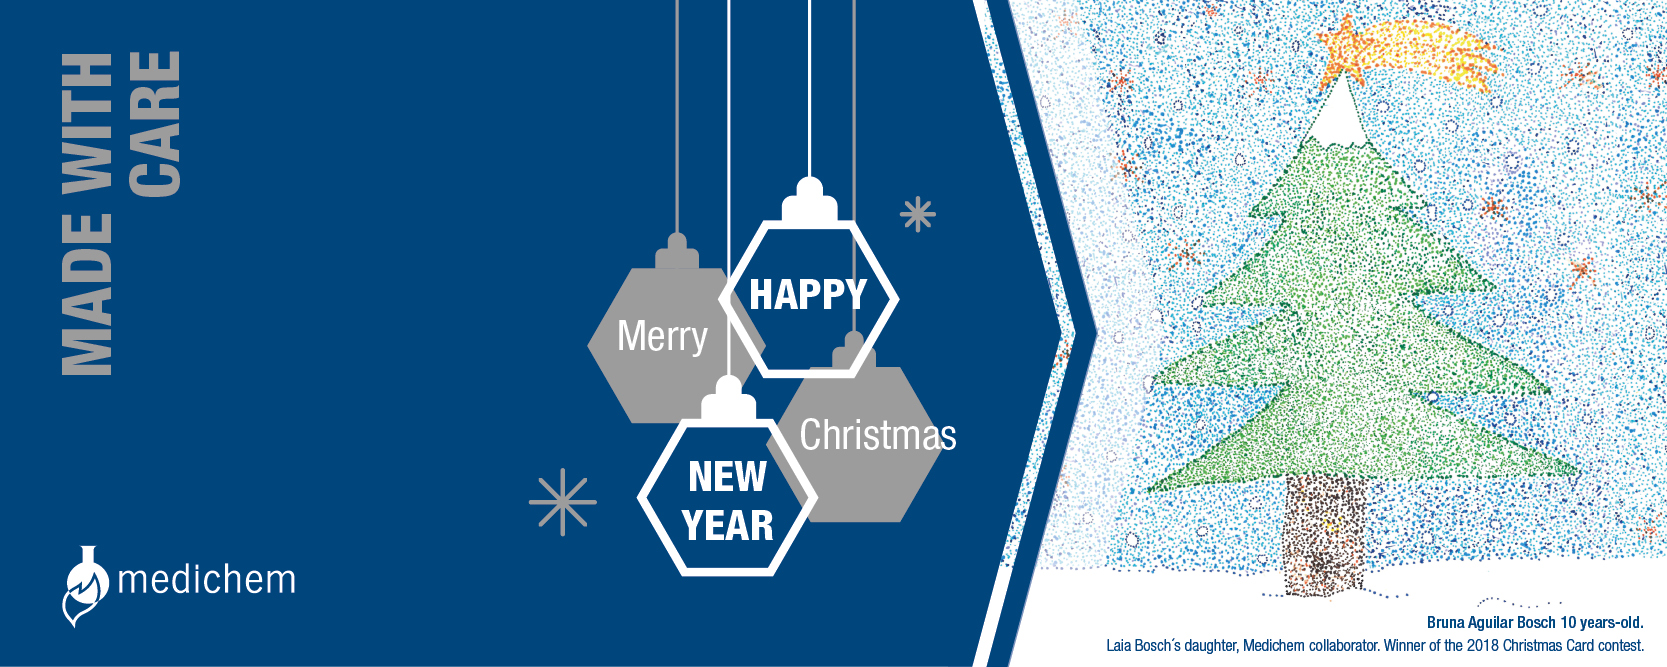 Christmas and New Year's greetings from Medichem